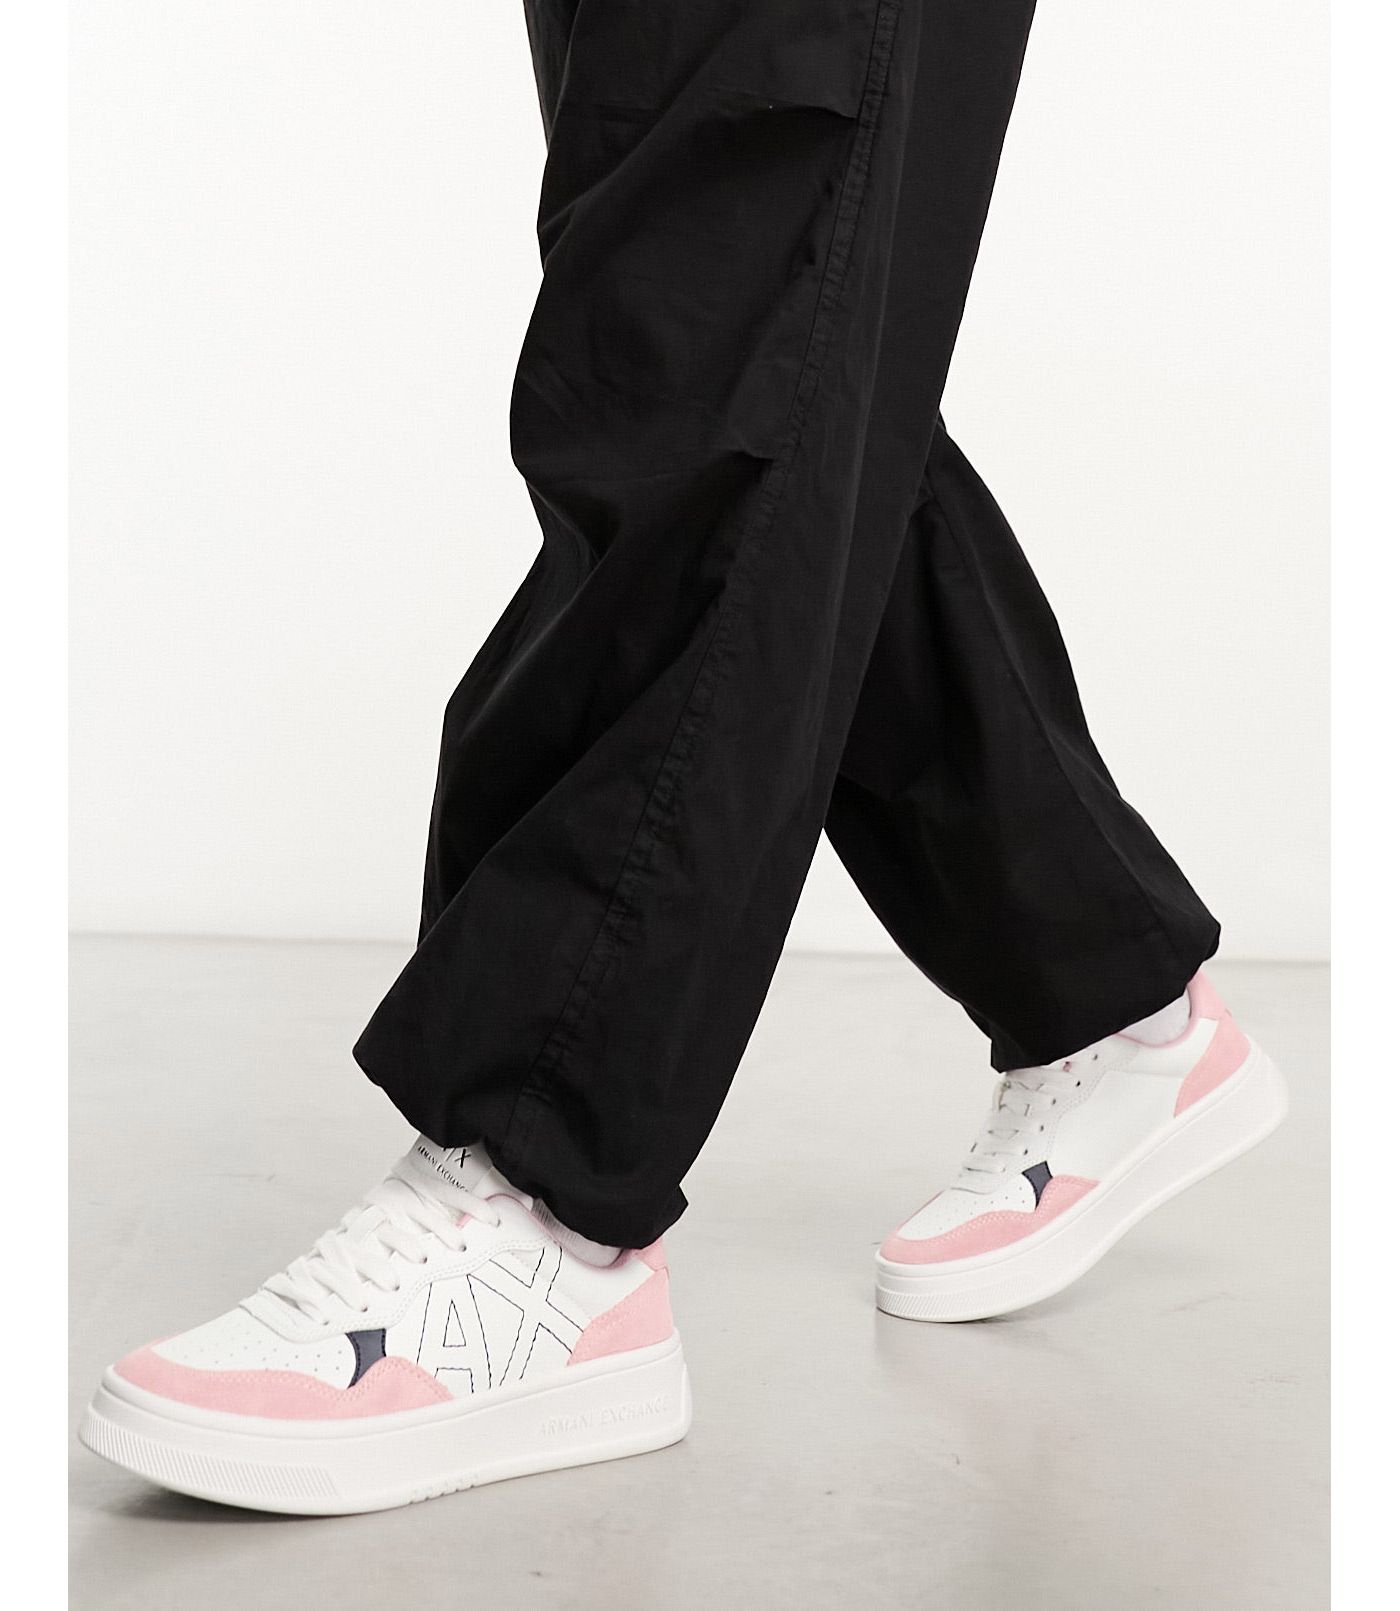 Armani Exchange trainers in white and pink